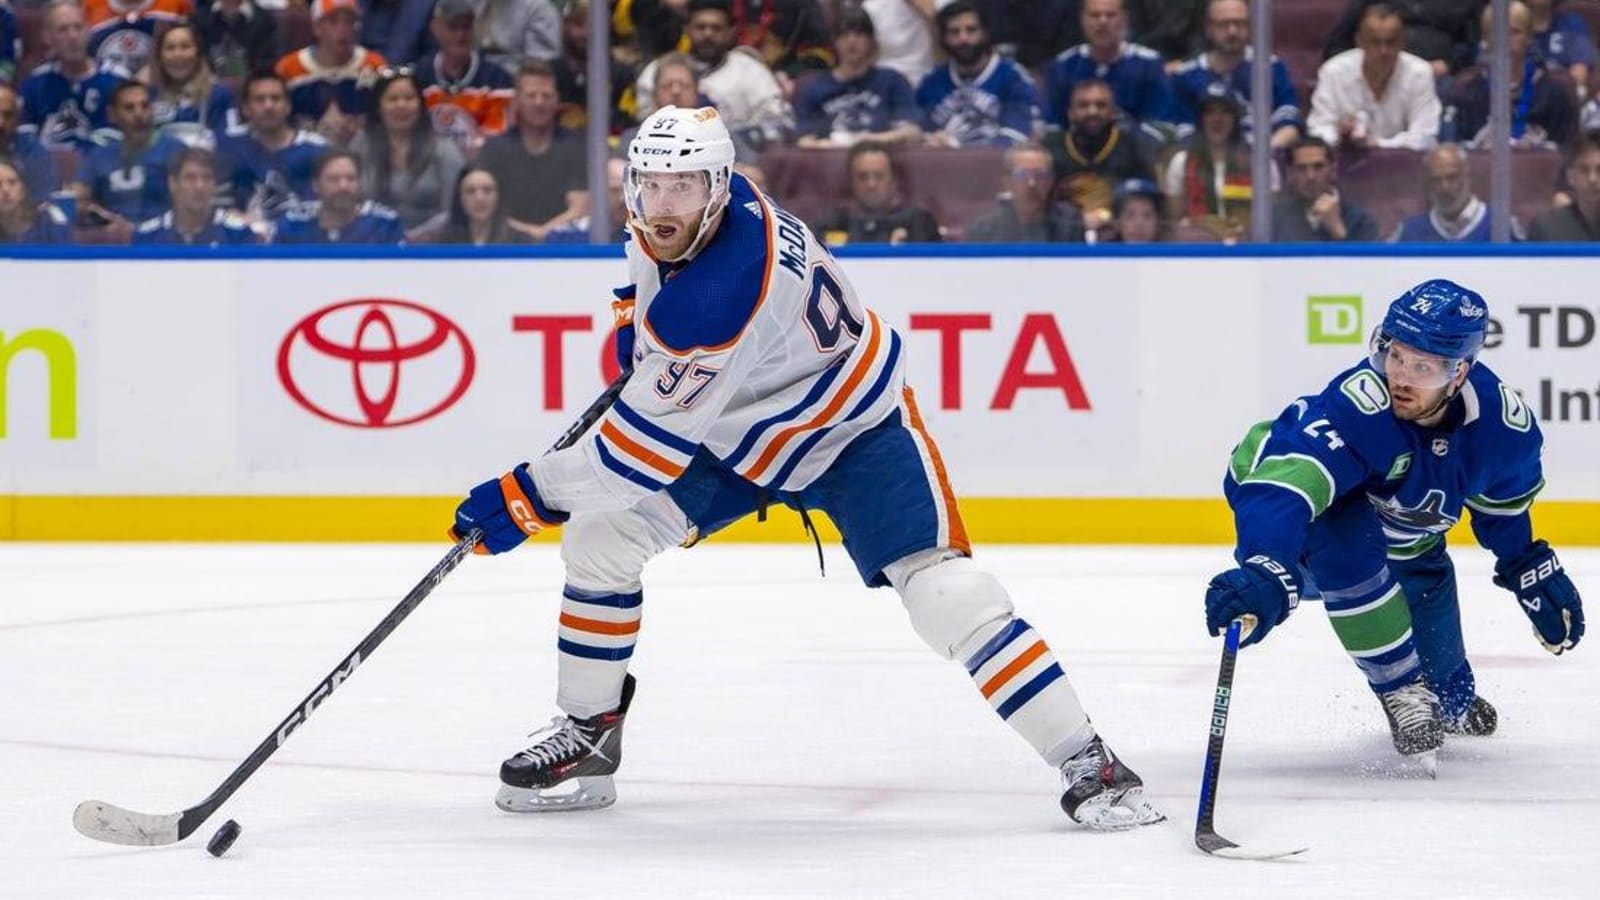 Connor McDavid&#39;s playmaking will be key in Oilers&#39; Game 3 vs. Canucks